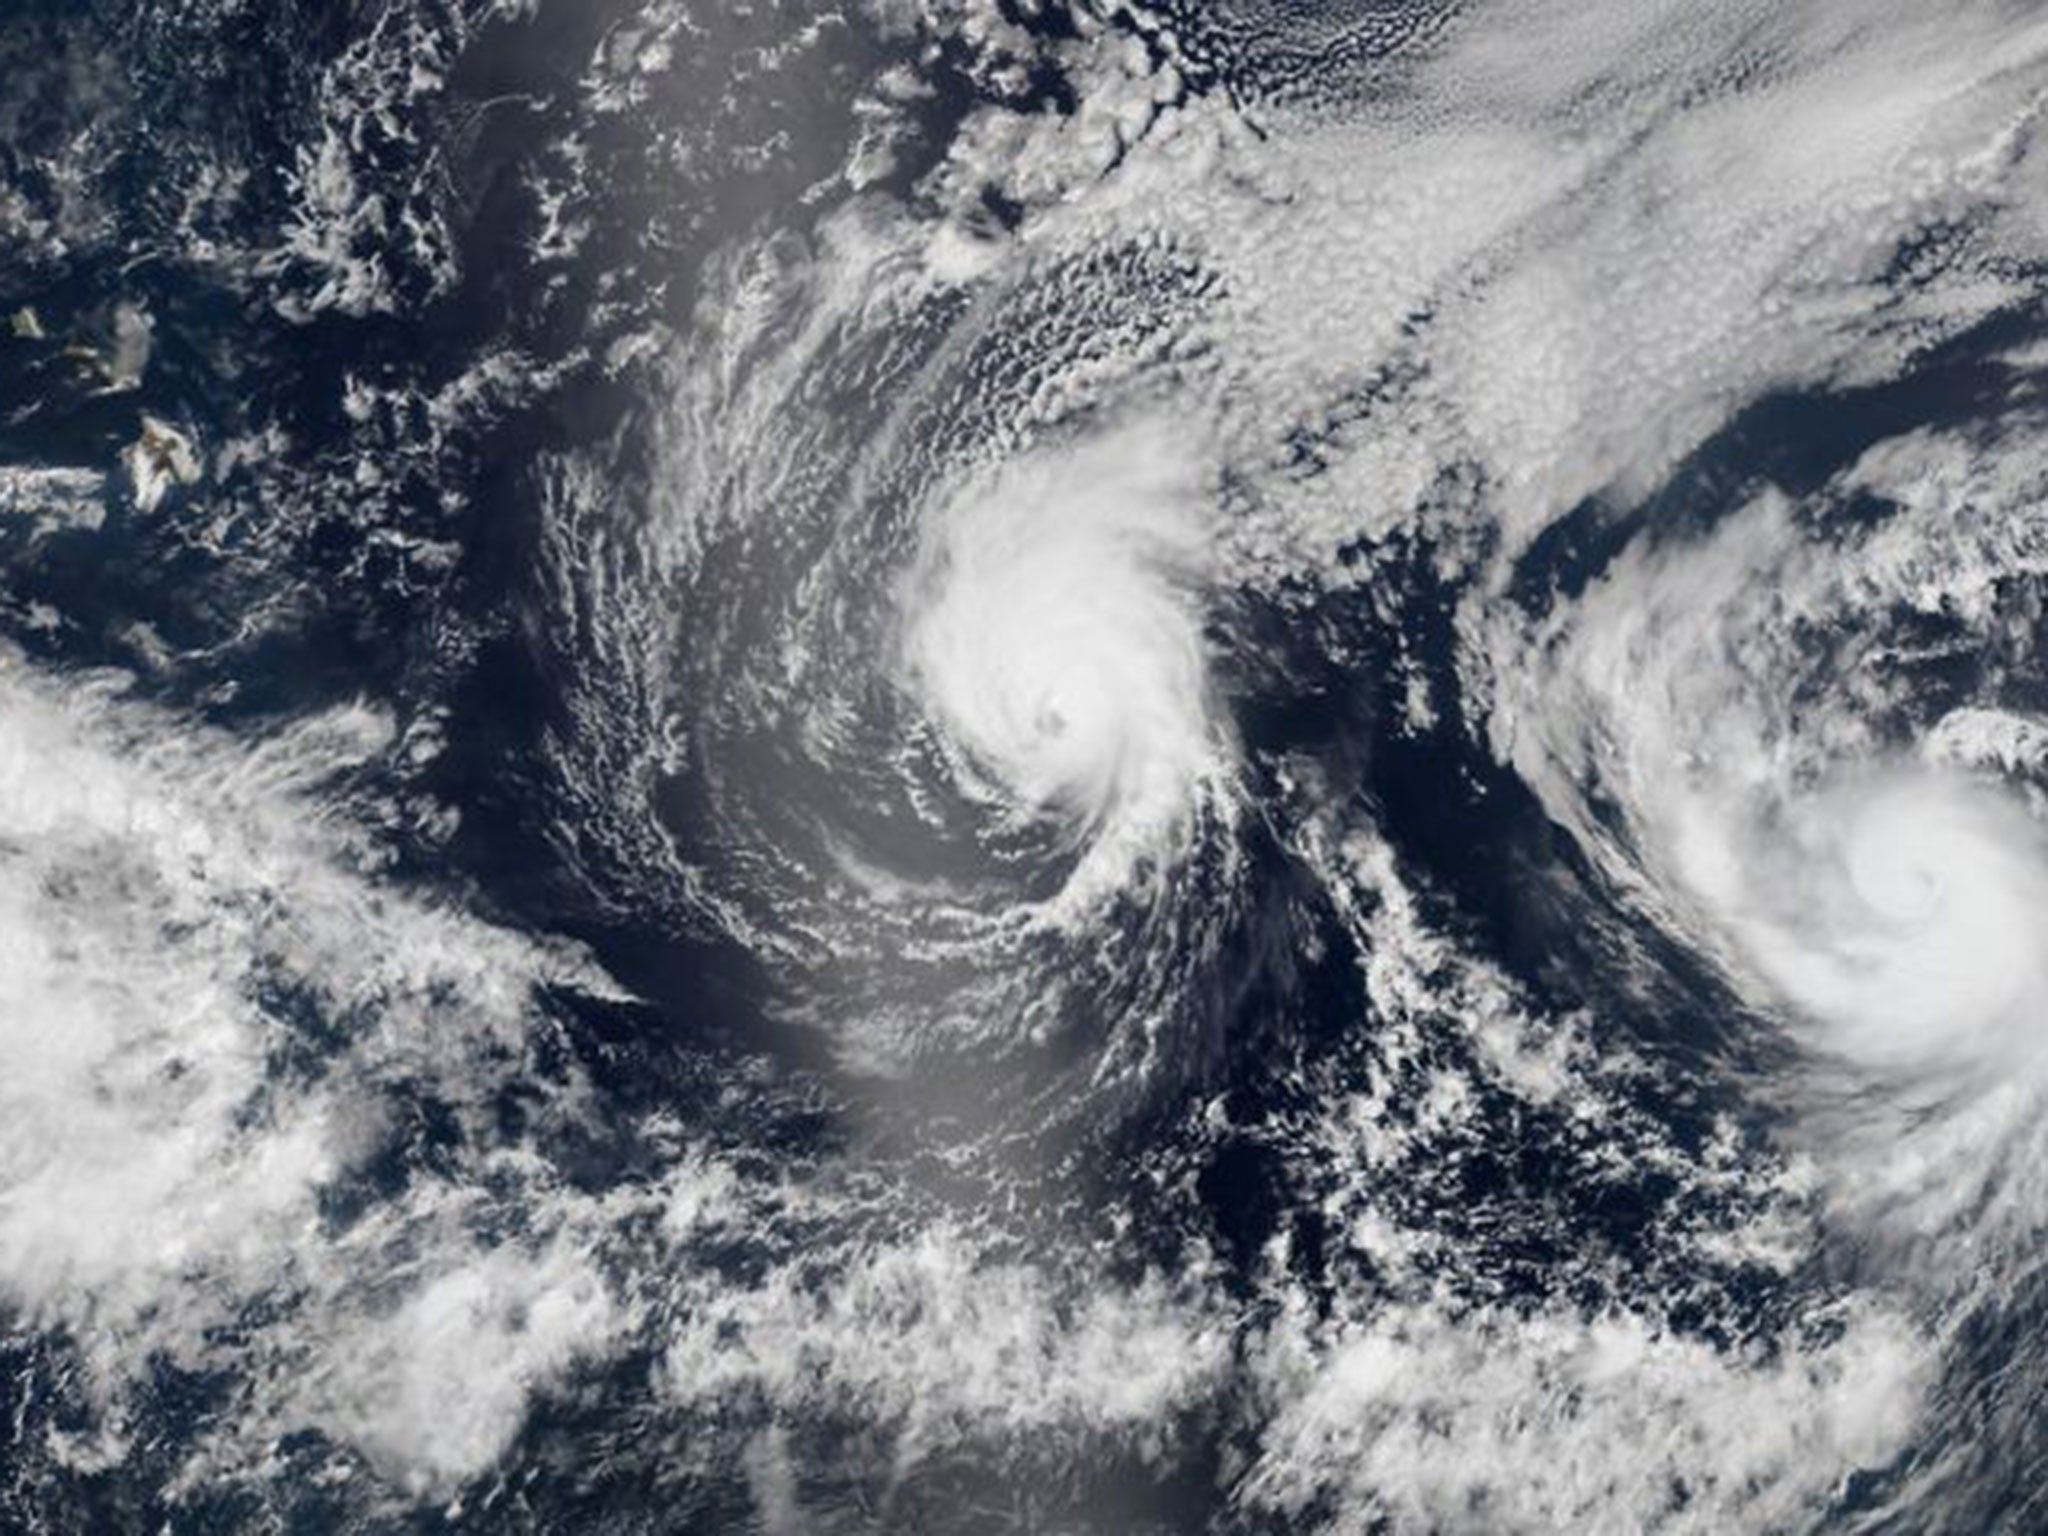 Two tropical Pacific Ocean hurricanes - Iselle at center and Julio at right - bearing down on Hawaii, top left. Hurricane Iselle is expected to reach Hawaii Thursday night, Aug. 7, 2014.